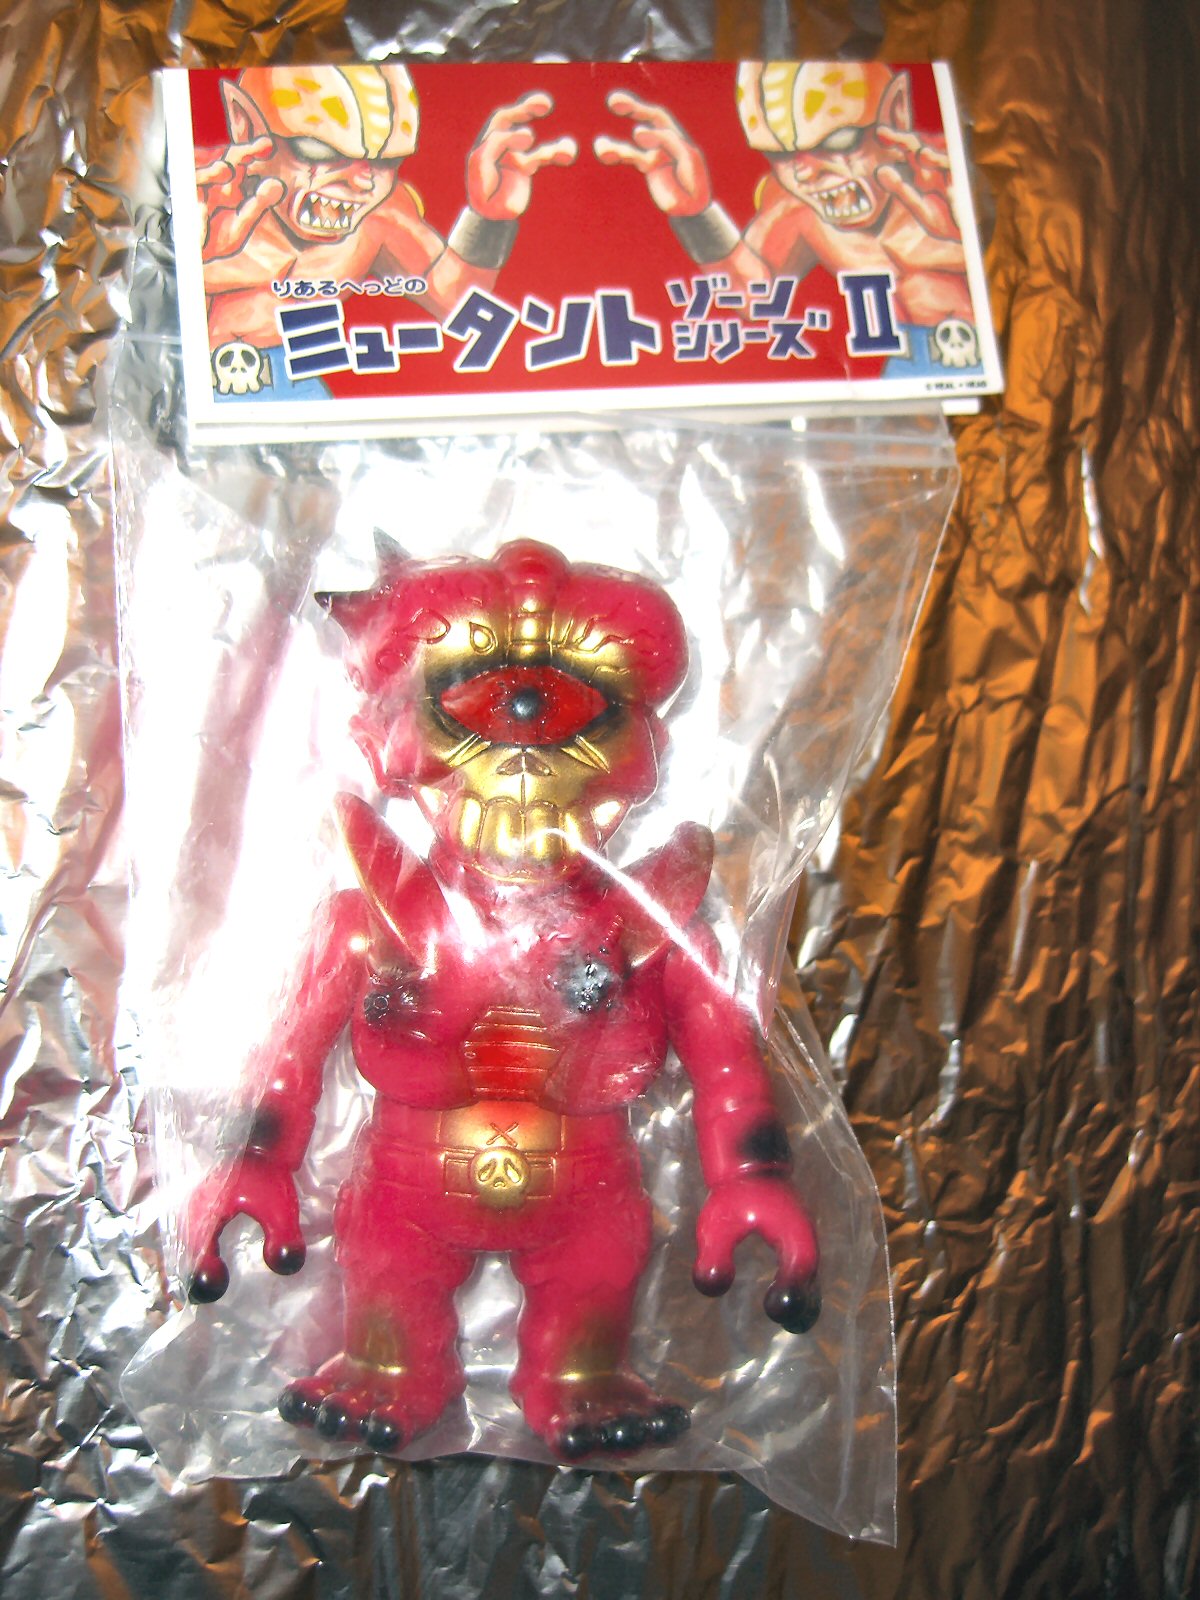 the figure is wearing pink and has large yellow eyes